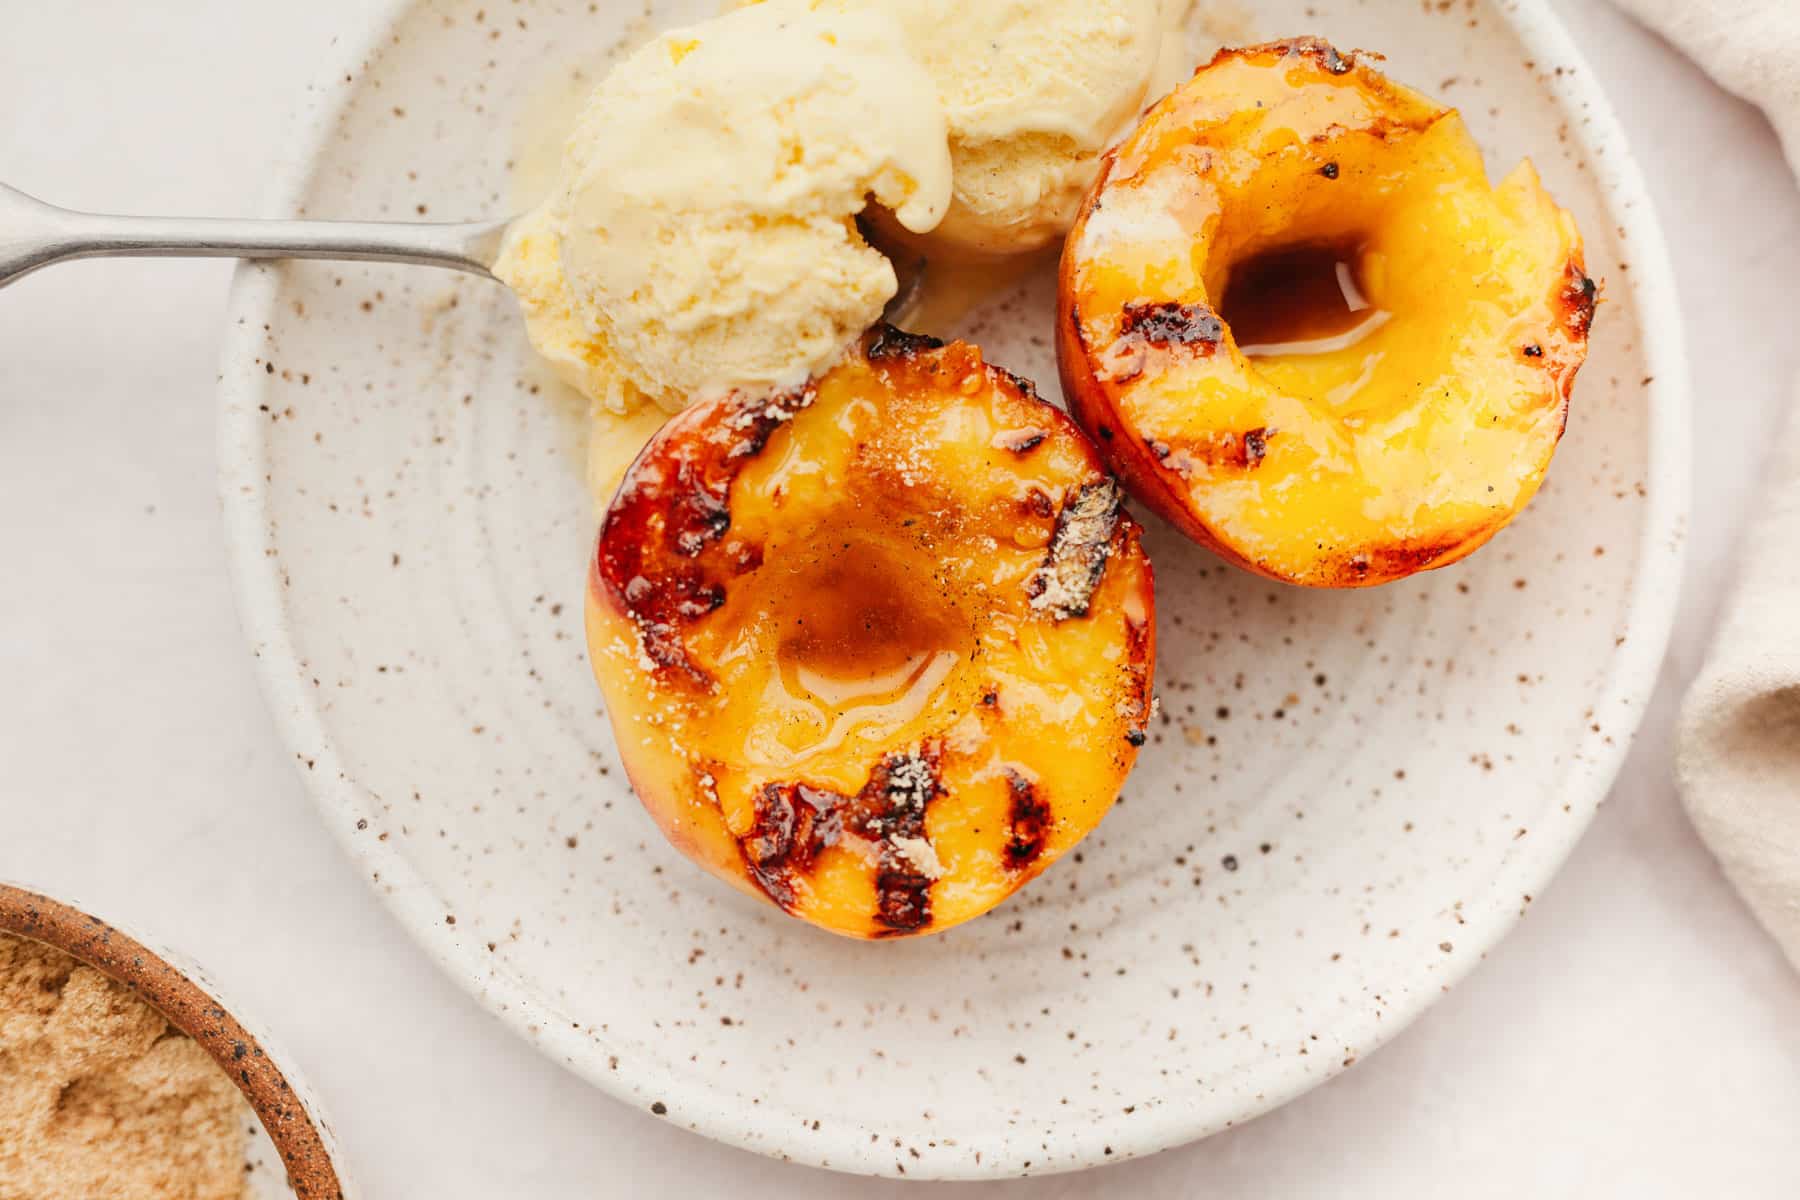 Broiled Peaches with Lemon Sauce